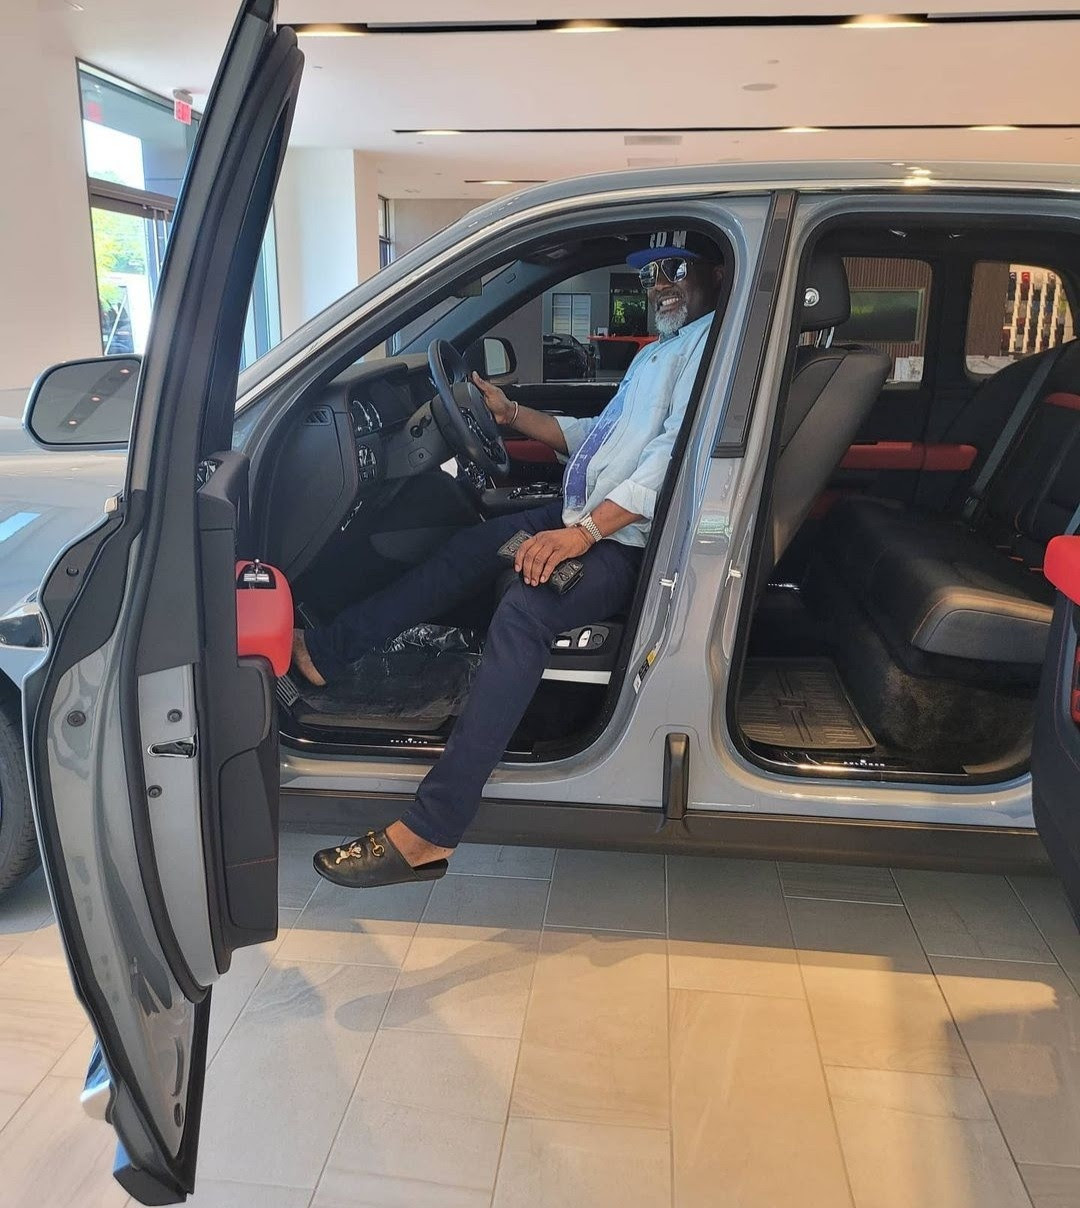 "Please pay up sir," Automobile sales company accuses Dino Melaye of unpaid debt after he flaunted his new Rolls Royce Cullinan